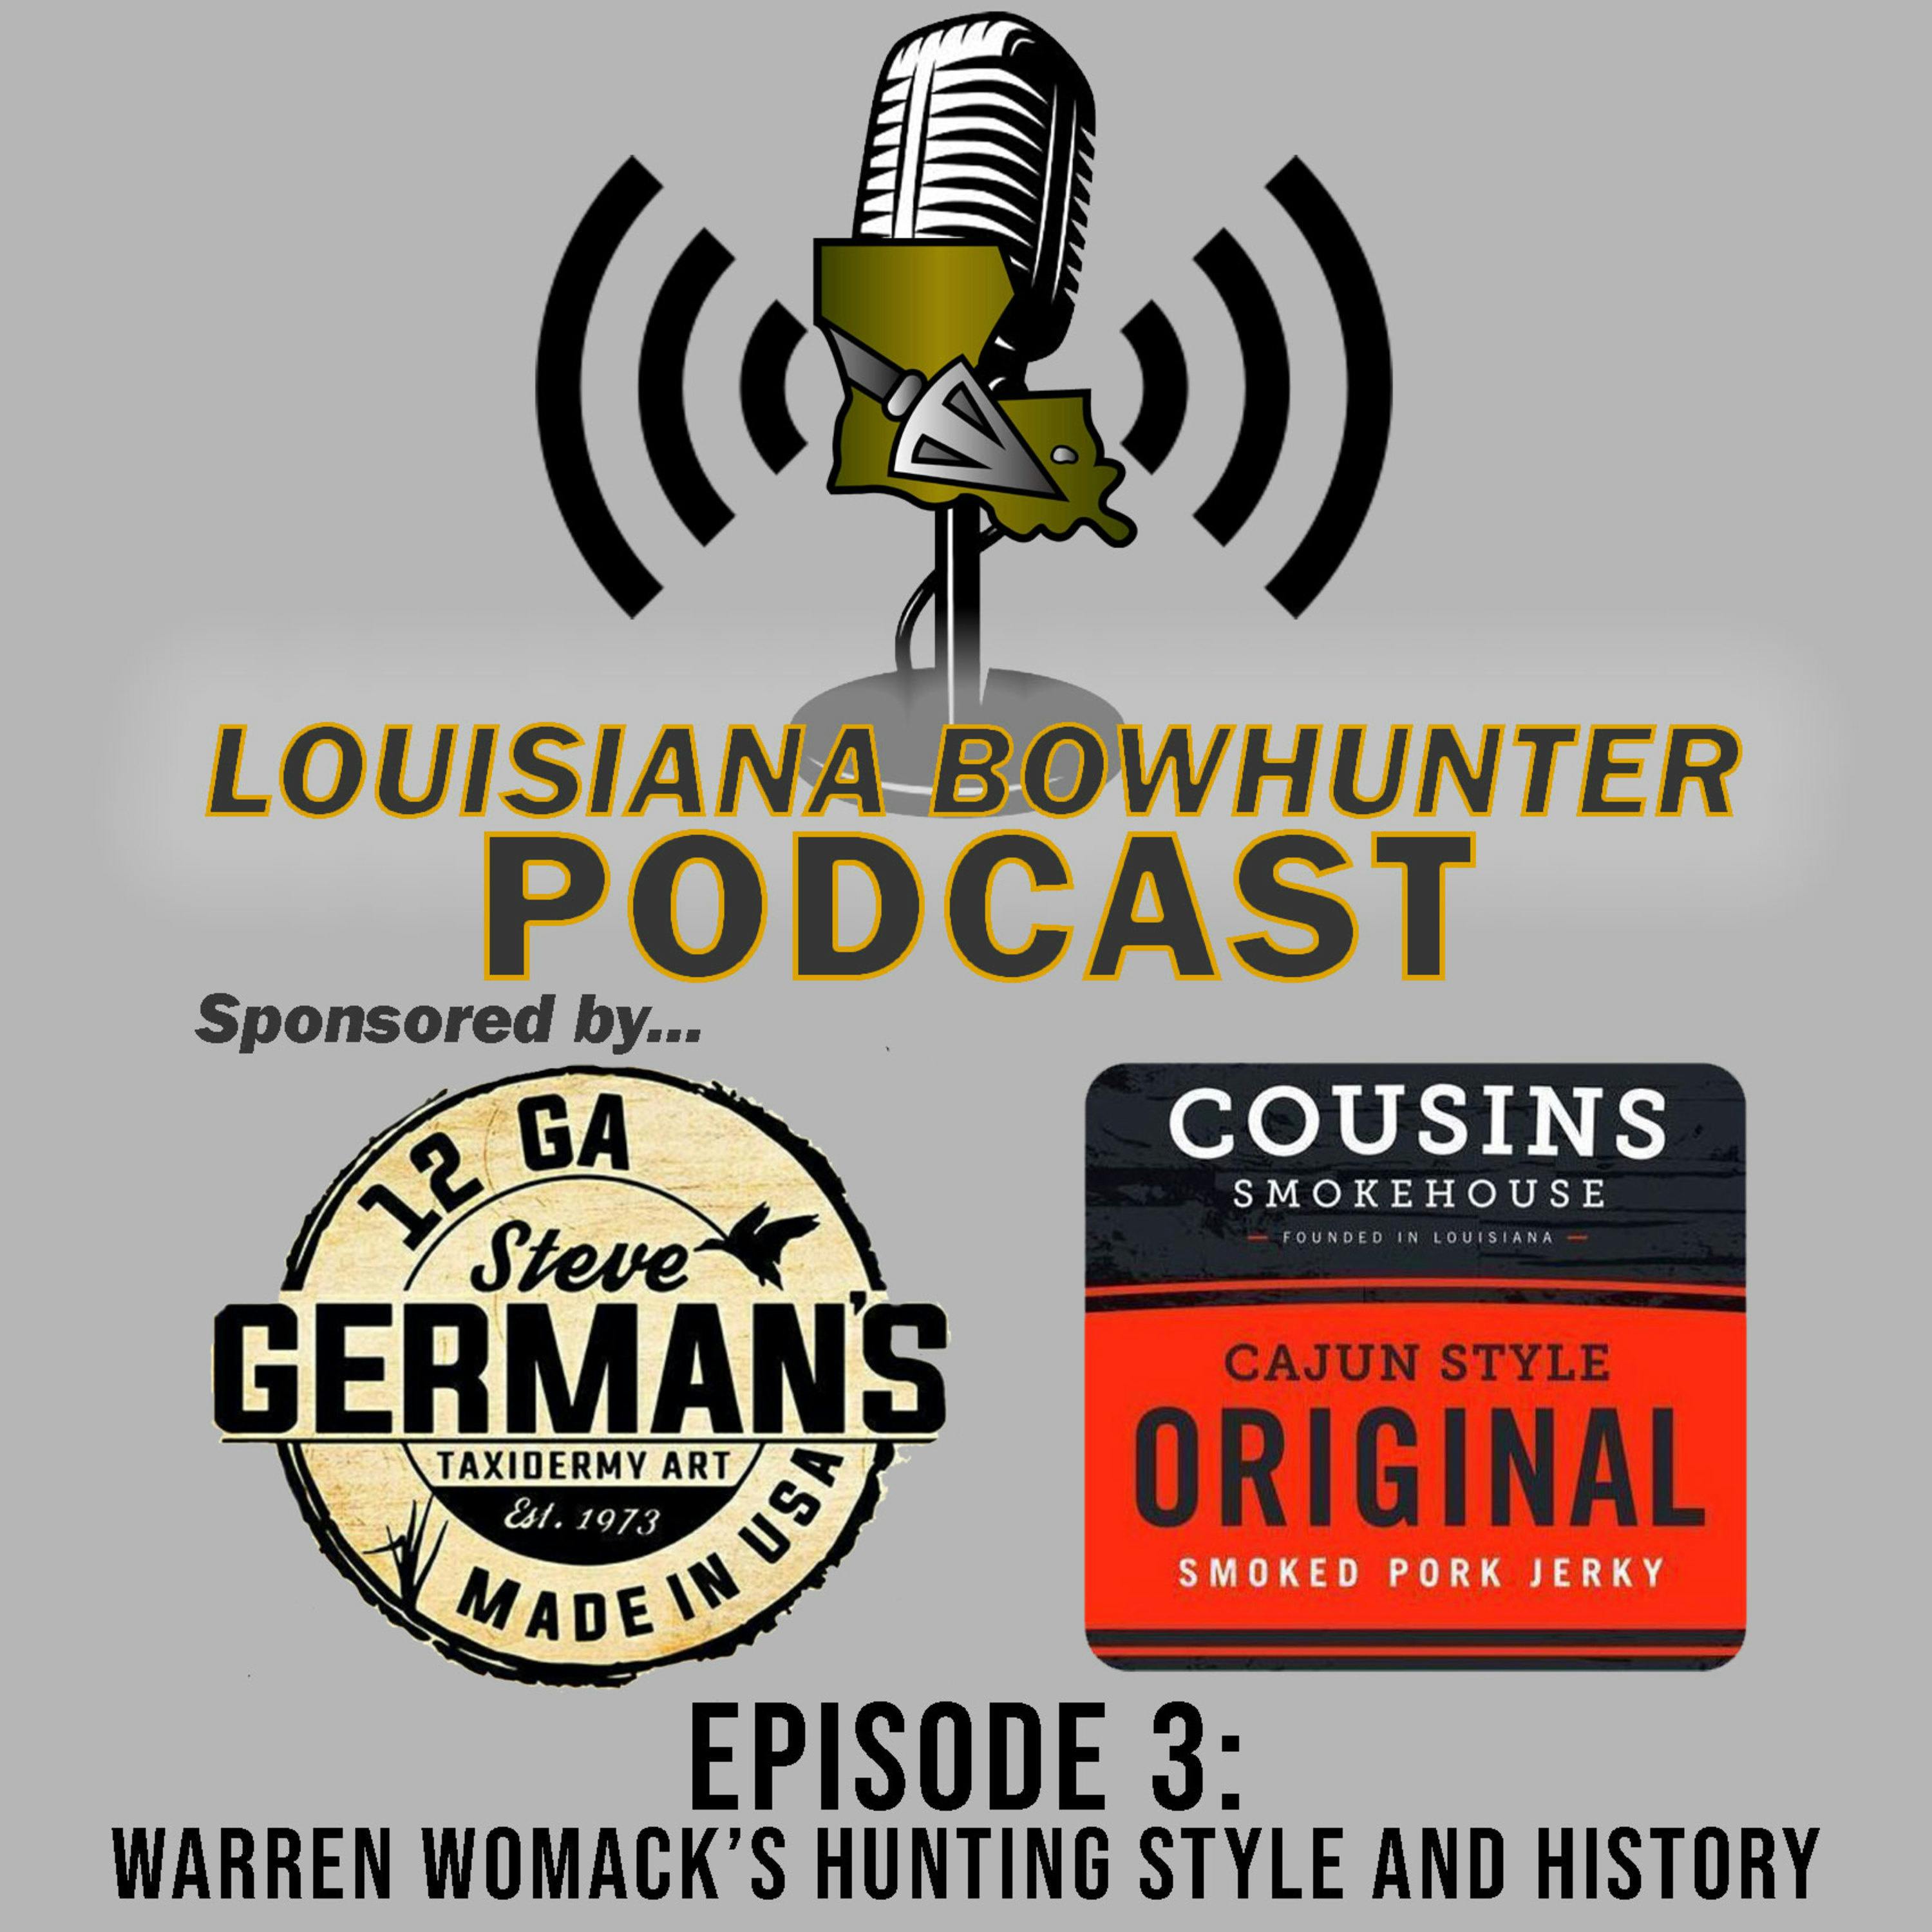 Episode 3 - Warren Womack's Hunting Style and 50yr Hunting History